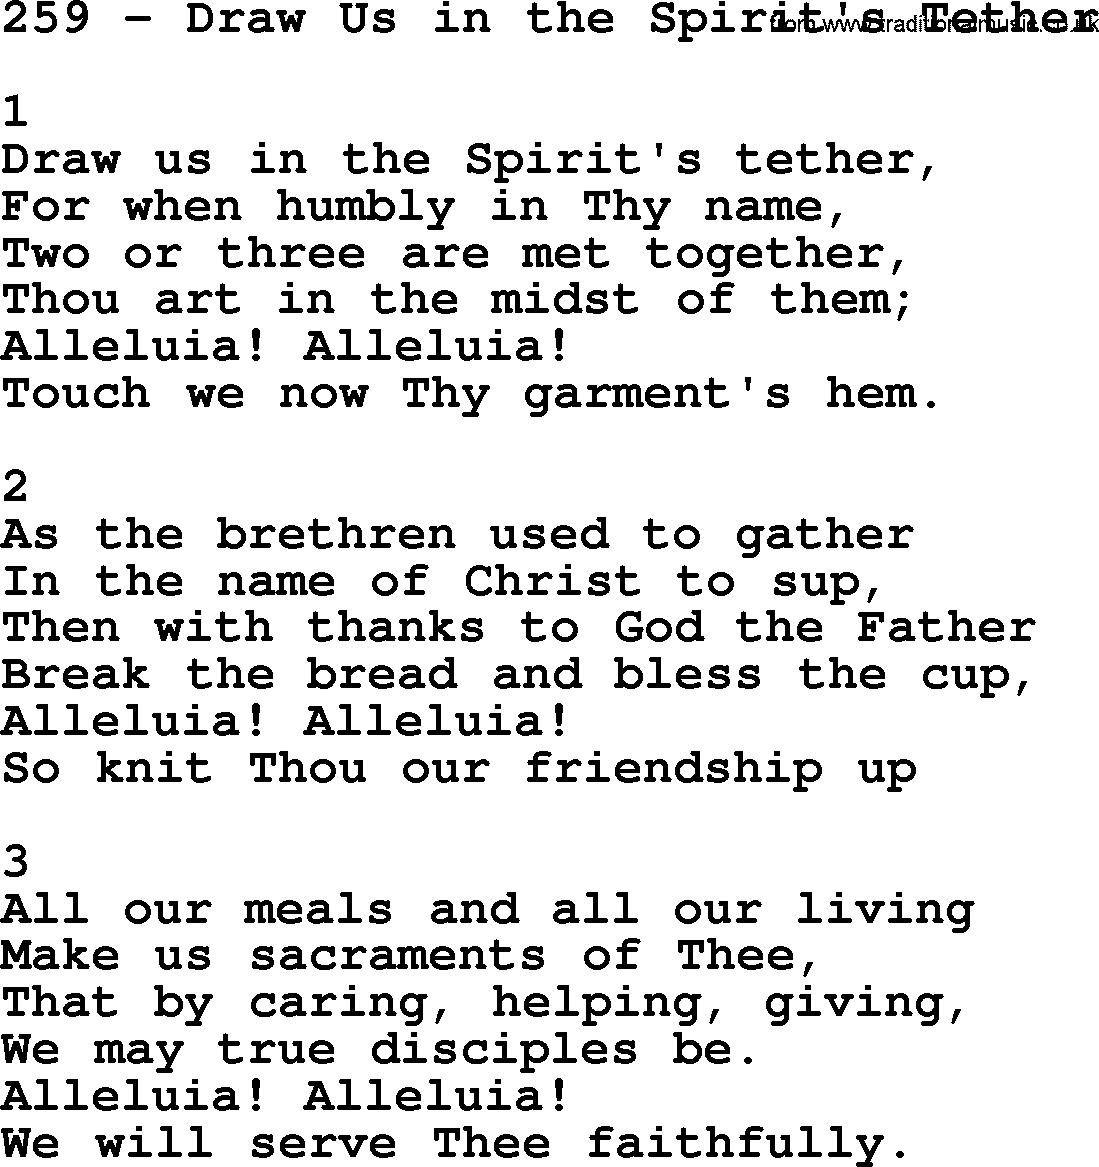 Complete Adventis Hymnal, title: 259-Draw Us In The Spirit's Tether, with lyrics, midi, mp3, powerpoints(PPT) and PDF,